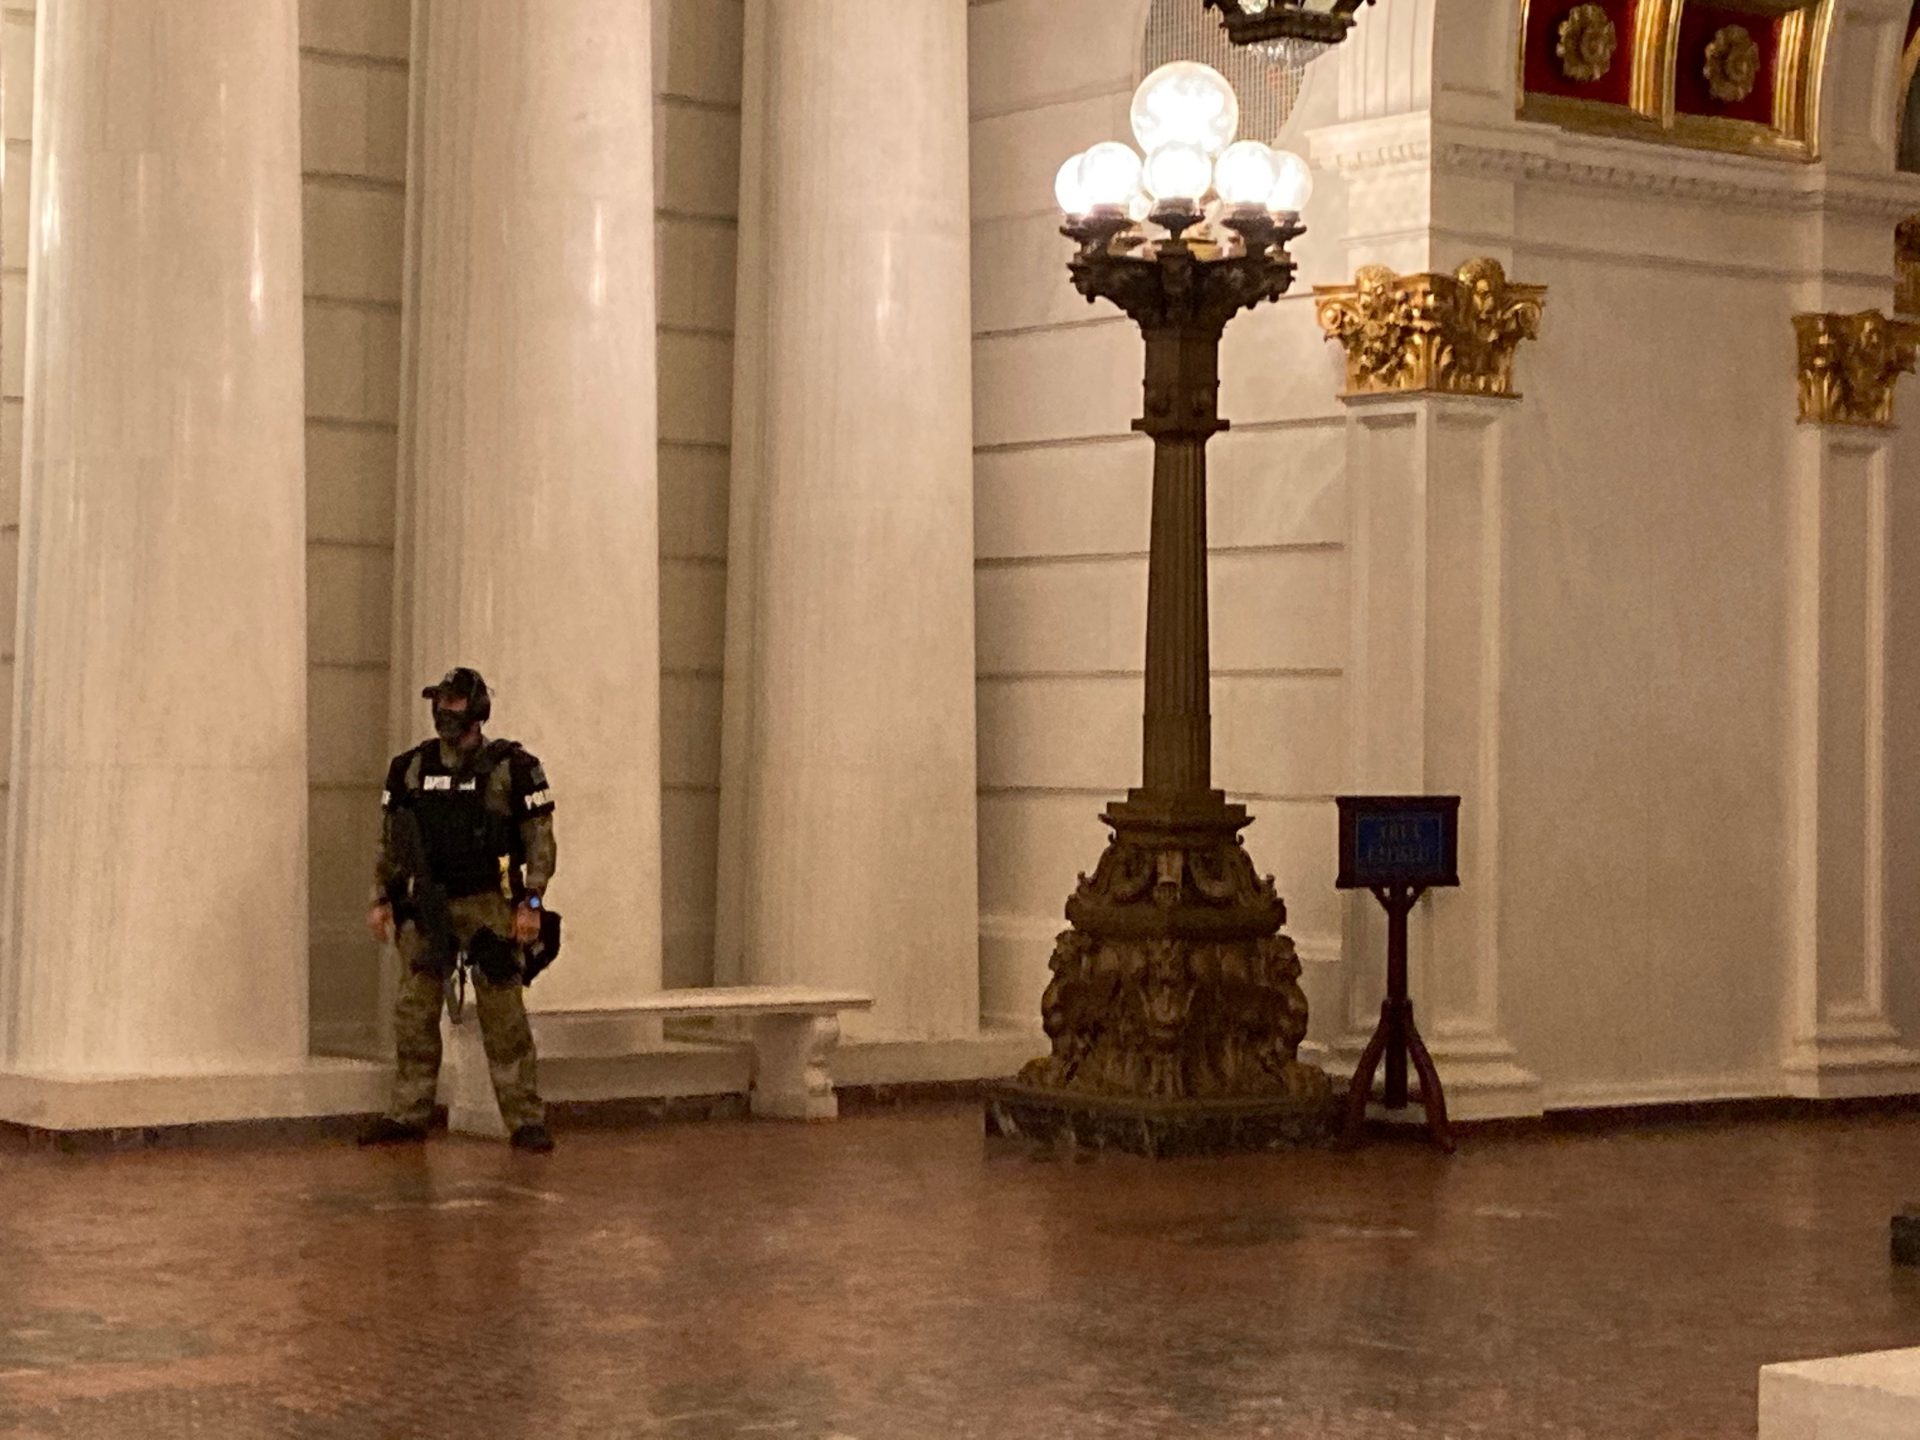 An armed Pennsylvania Capitol Police officer guards the building on Jan. 12, 2021.